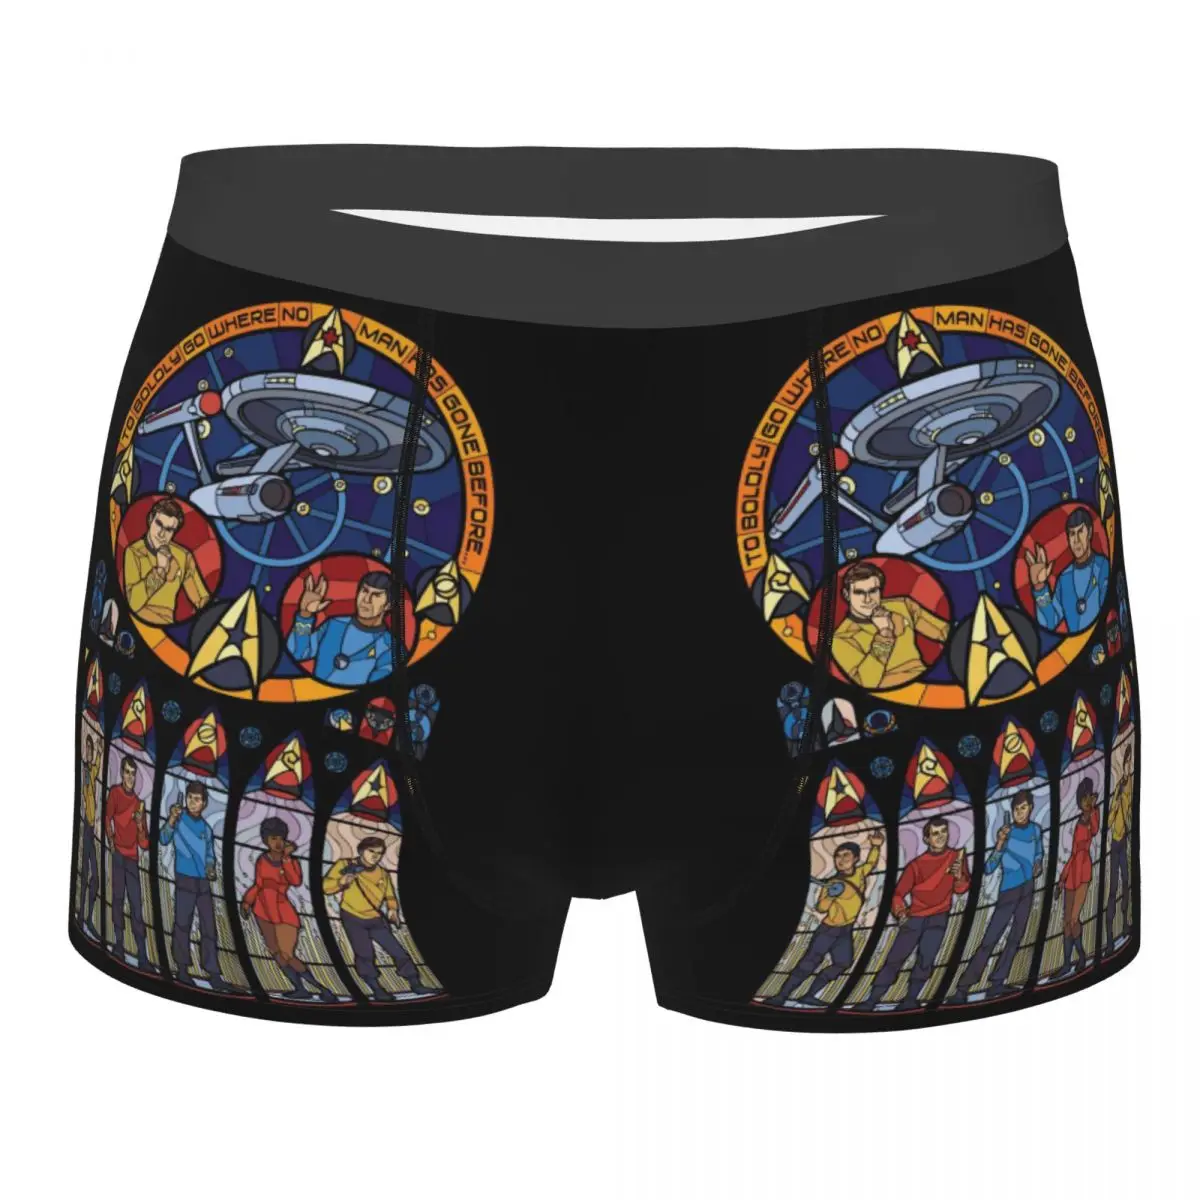 

Star Treks Starfleet Theme Design Man'scosy Boxer Briefs,3D printing Underpants, Highly Breathable Top Quality Gift Idea